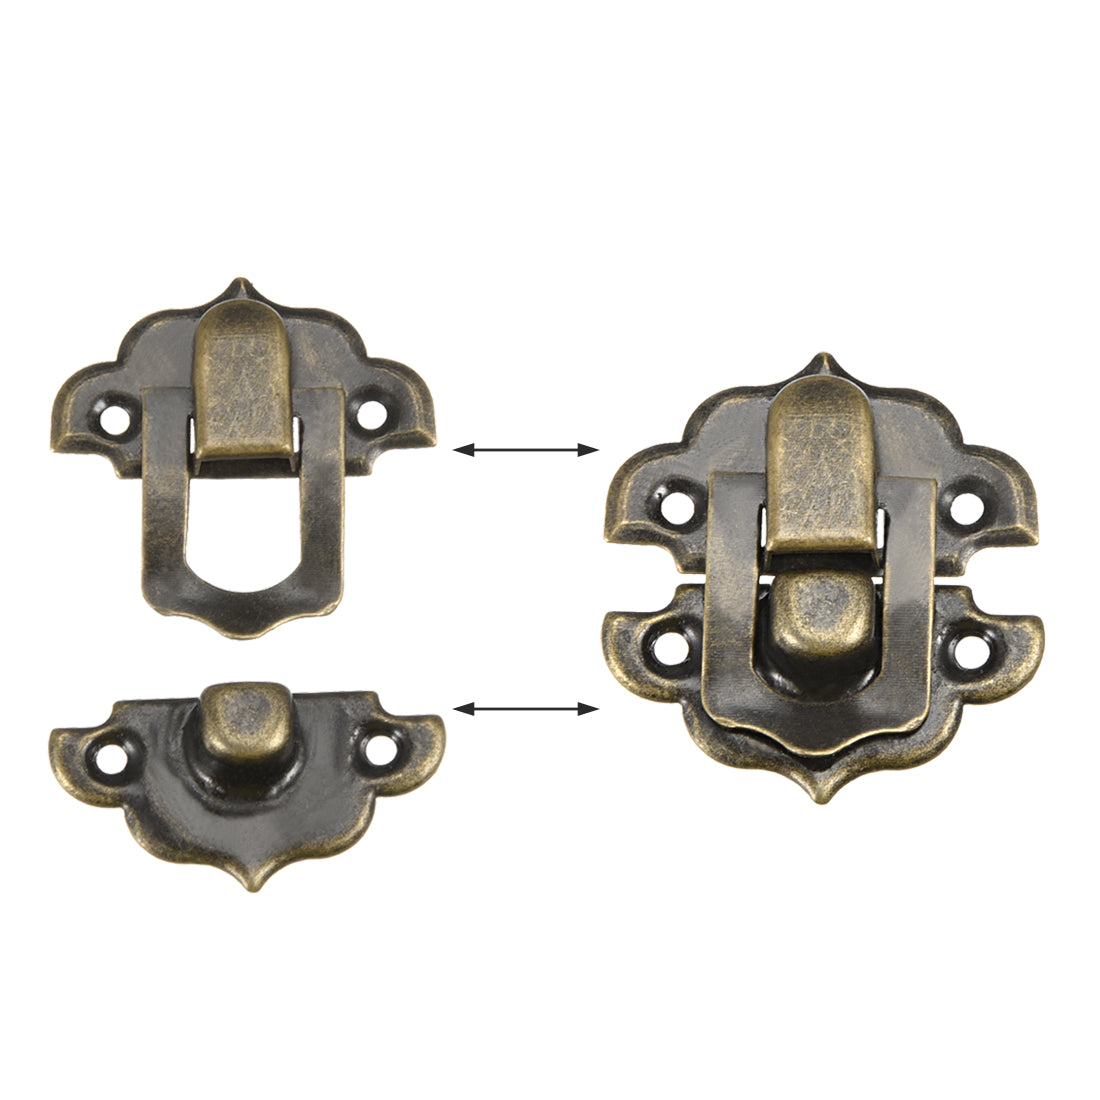 uxcell Uxcell Box Latch, Small Size Bronze Decorative Hasp Jewelry cases Catch w Screws 2 Sets